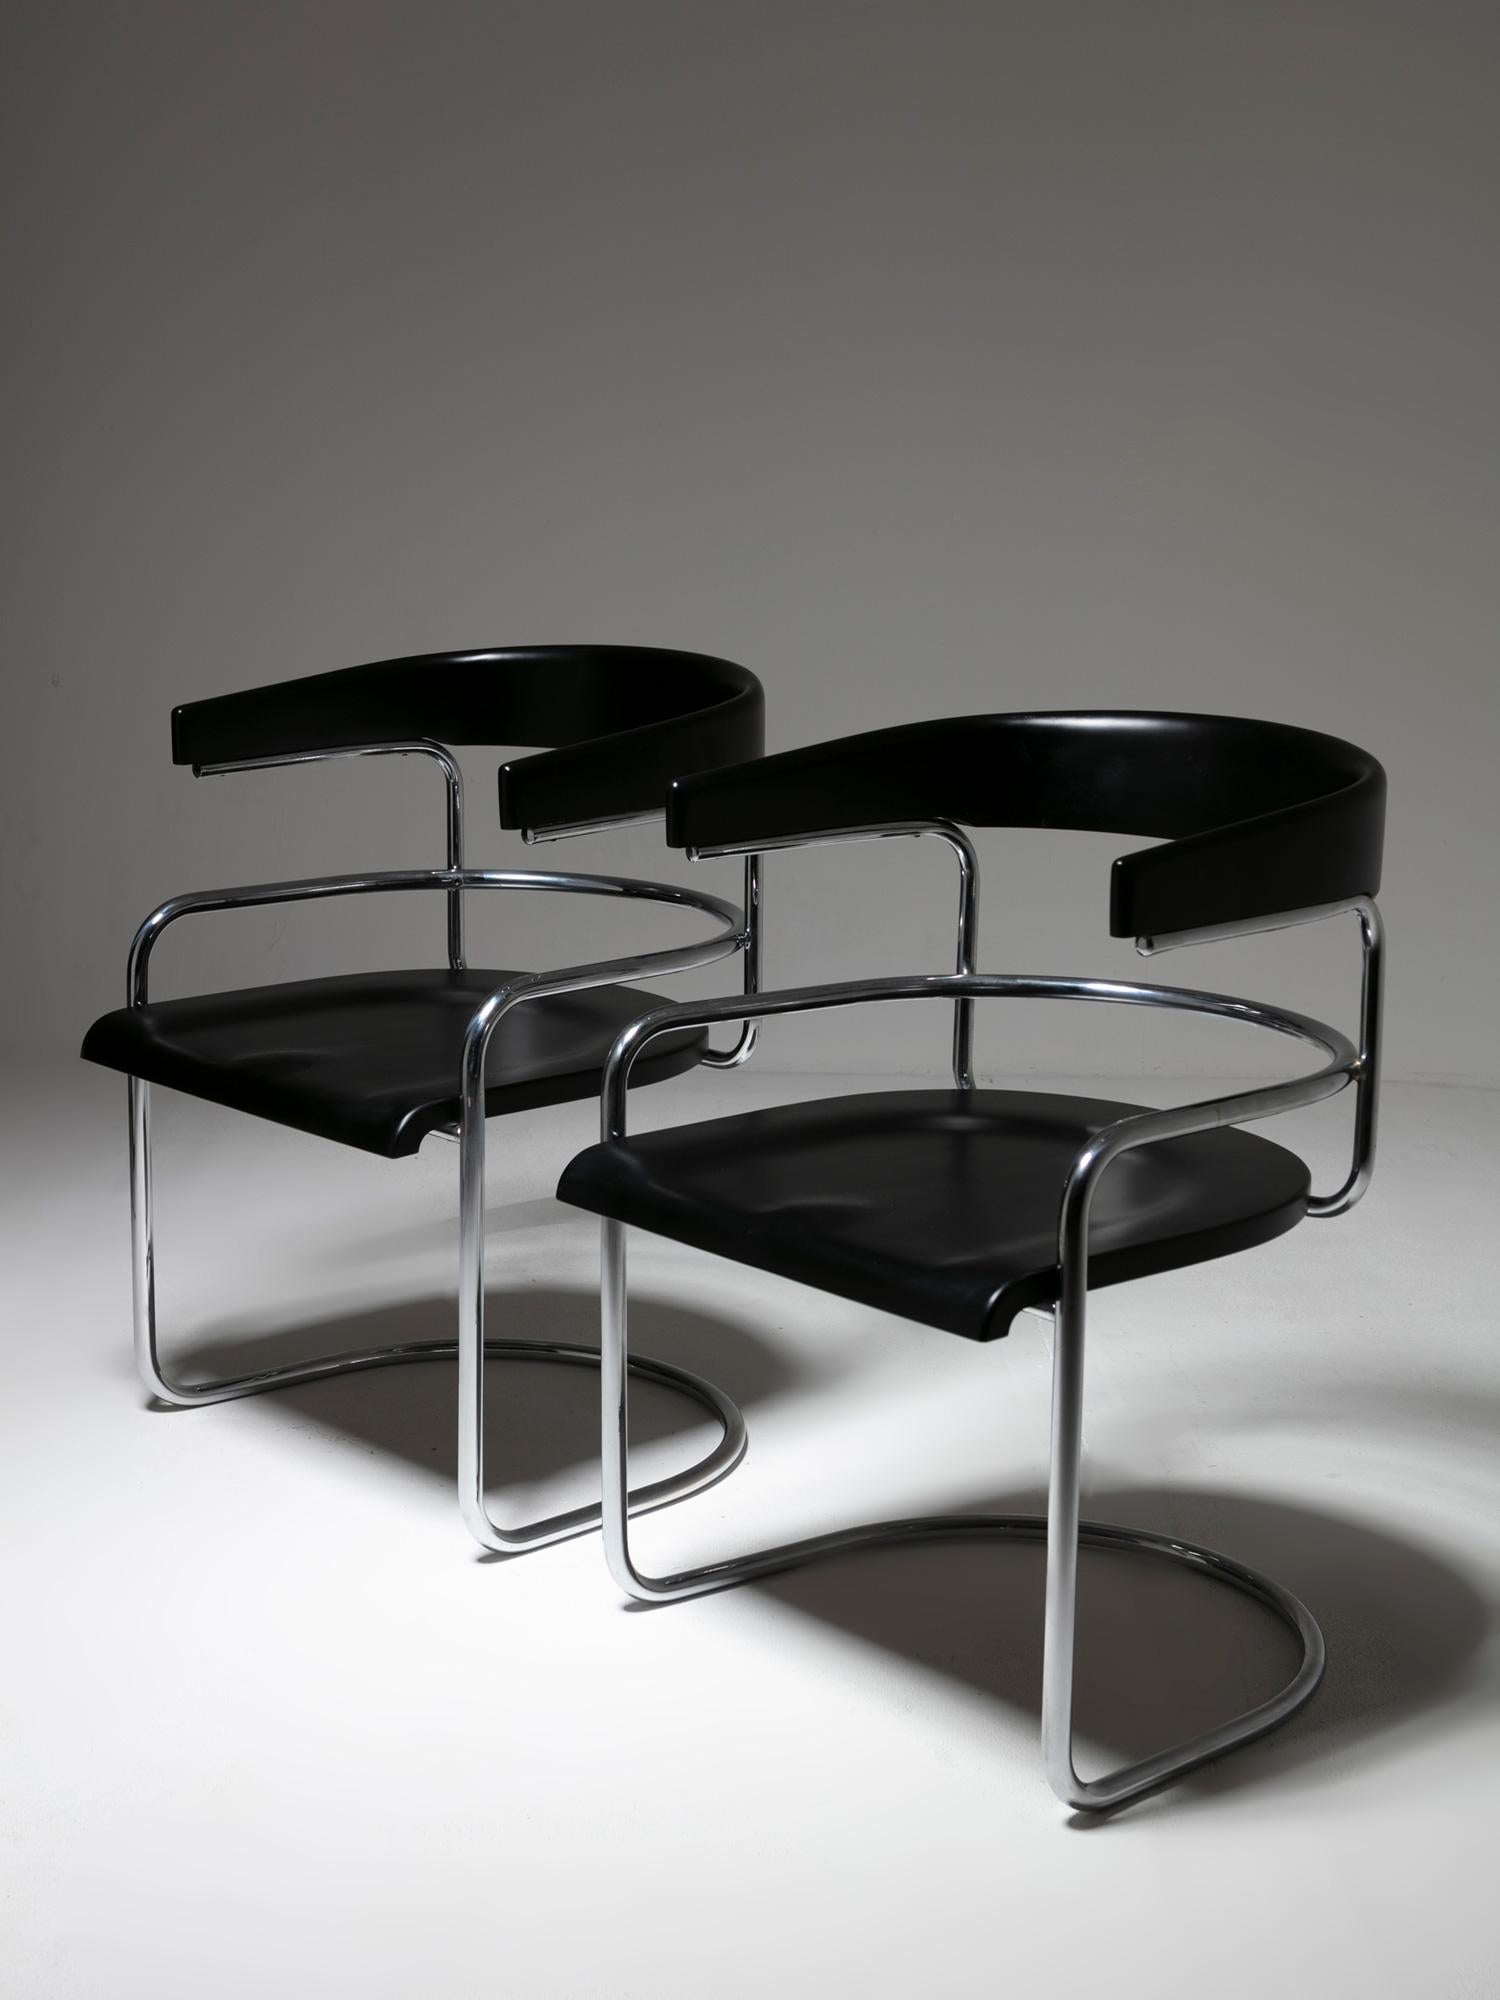 Rare set of two Saga armchairs by Ennio Chiggio for Nikol Internazionale.
Chrome frame supports black wood seat and back rests.
An intriguing work connected to 1920s shapes.